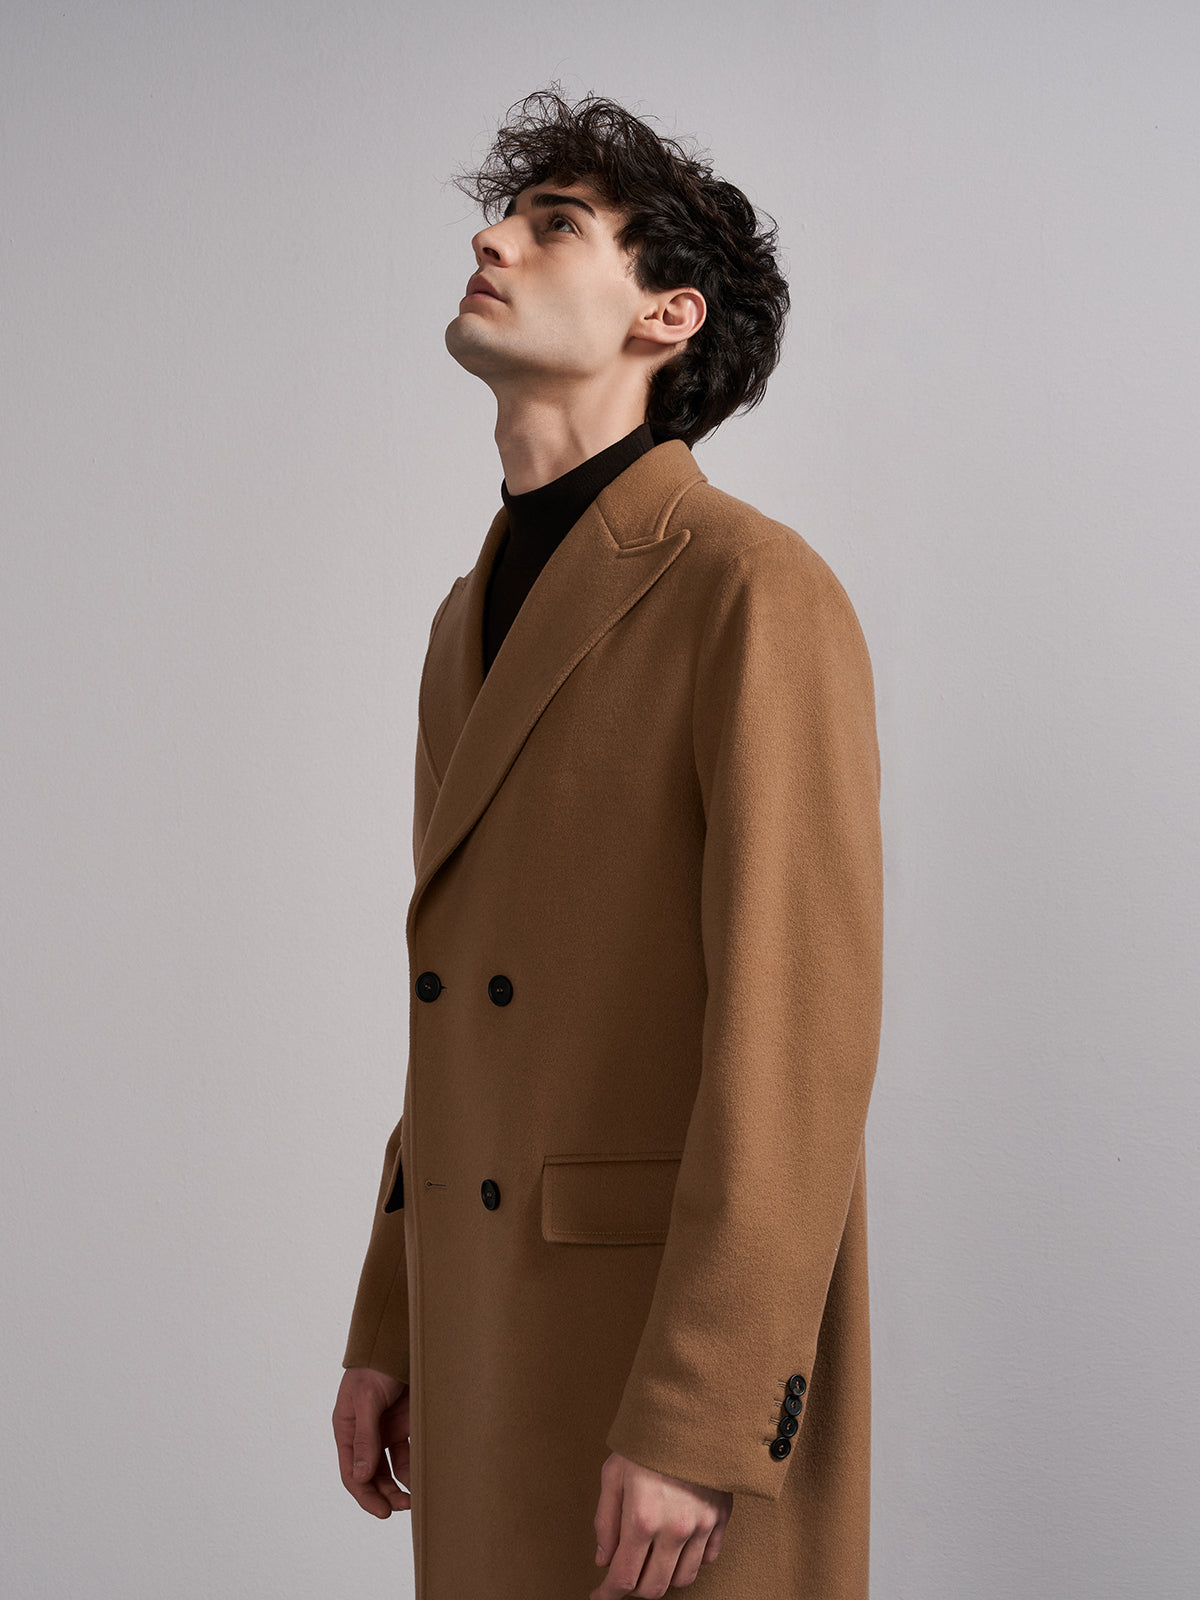 Deconstructed coat in cashmere blend cloth